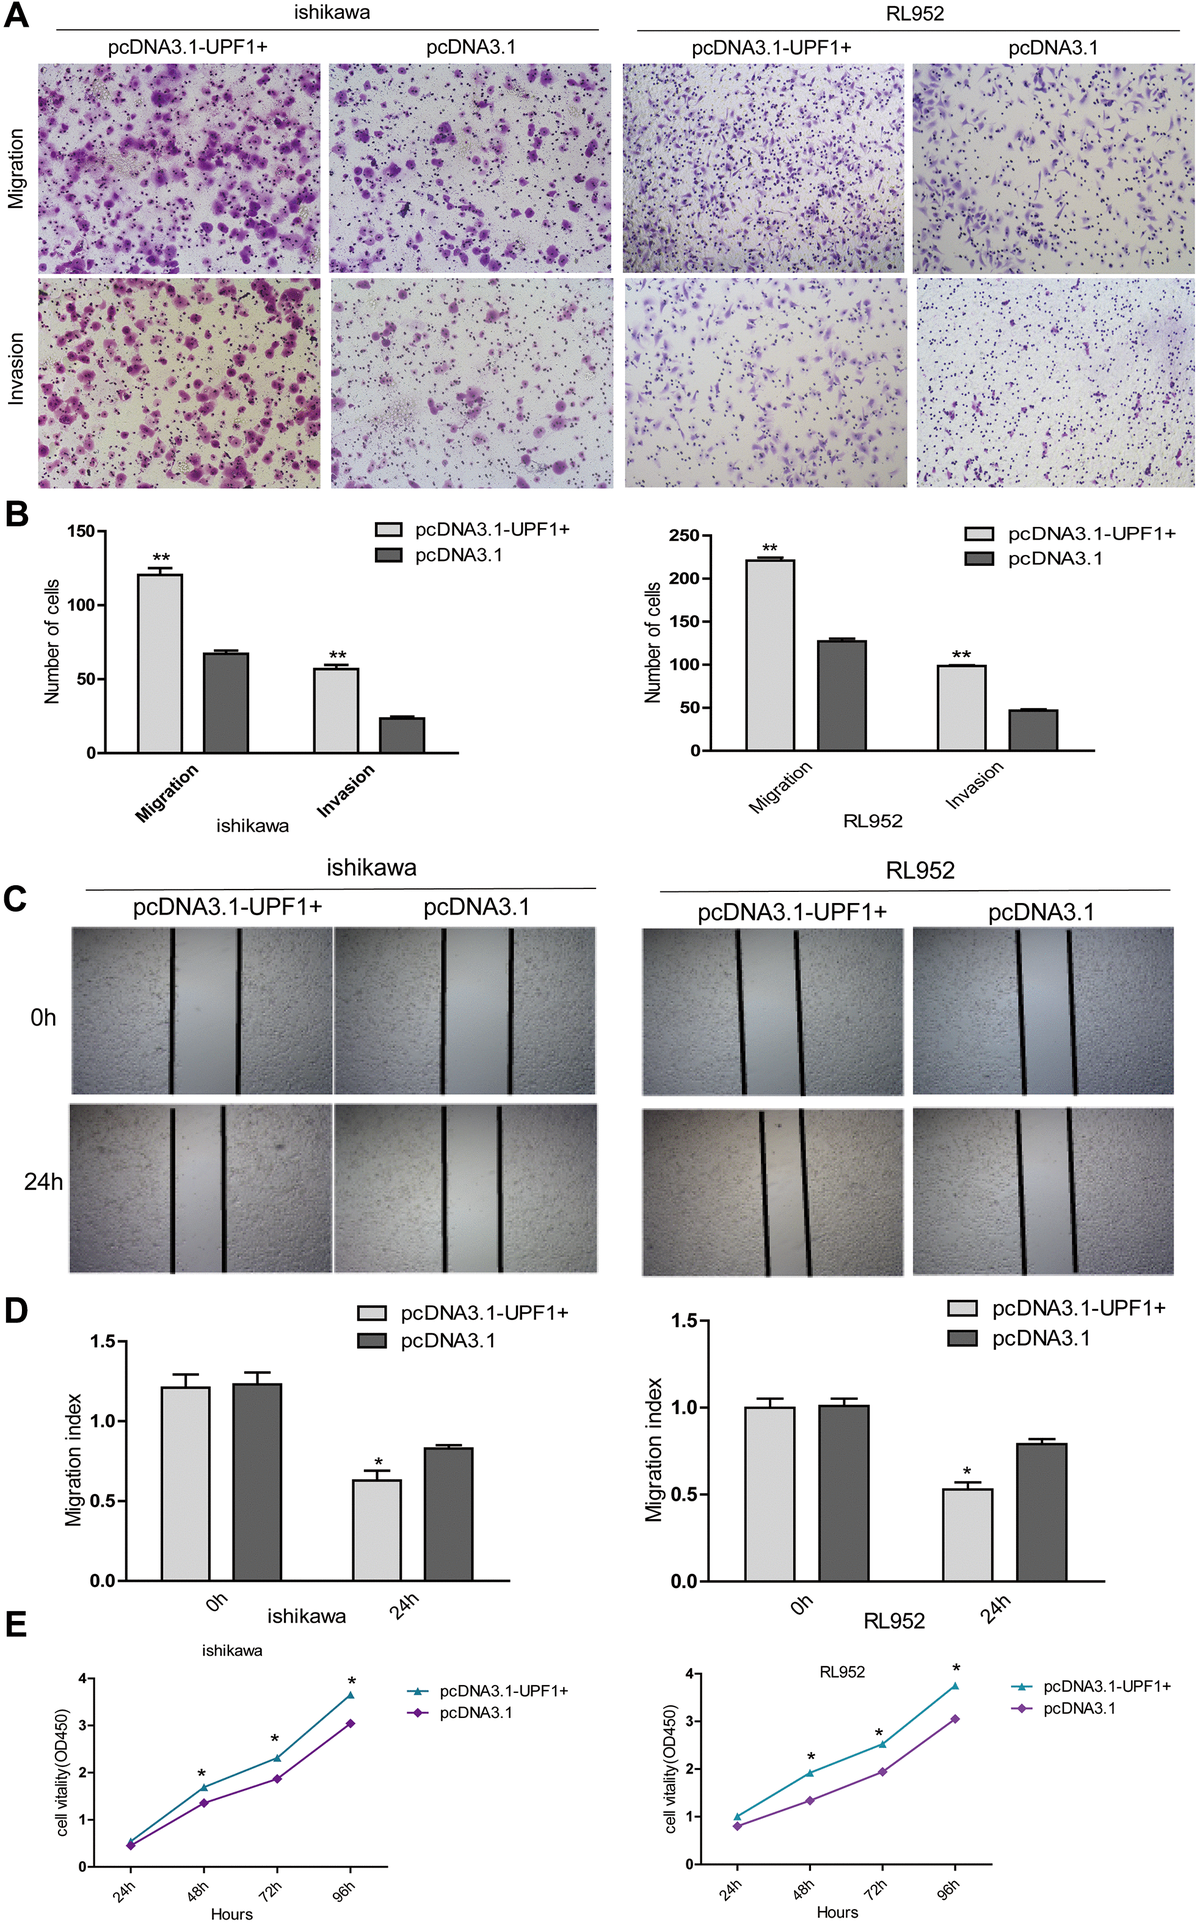 The effect of UPF1 on cell migration, invasion and proliferation in Ishikawa and RL952 EEC cells. (A, B) Migration and invasion assay in Ishikawa and RL952 cells that were transfected with the pcDNA3.1-UPF1+ and pcDNA3.1. Cells were evaluated at 12h after transfection(NIKON,100X). The results are shown as the mean±SEM from two independent experiments(**PC, D) Wound healing assay showing cell migration in Ishikawa and RL952 cells(*pE) CCK8 assay showing cell proliferation in Ishikawa and RL952 that were transfected with pcDNA3.1-UPF1+, pcDNA3.1 (*p